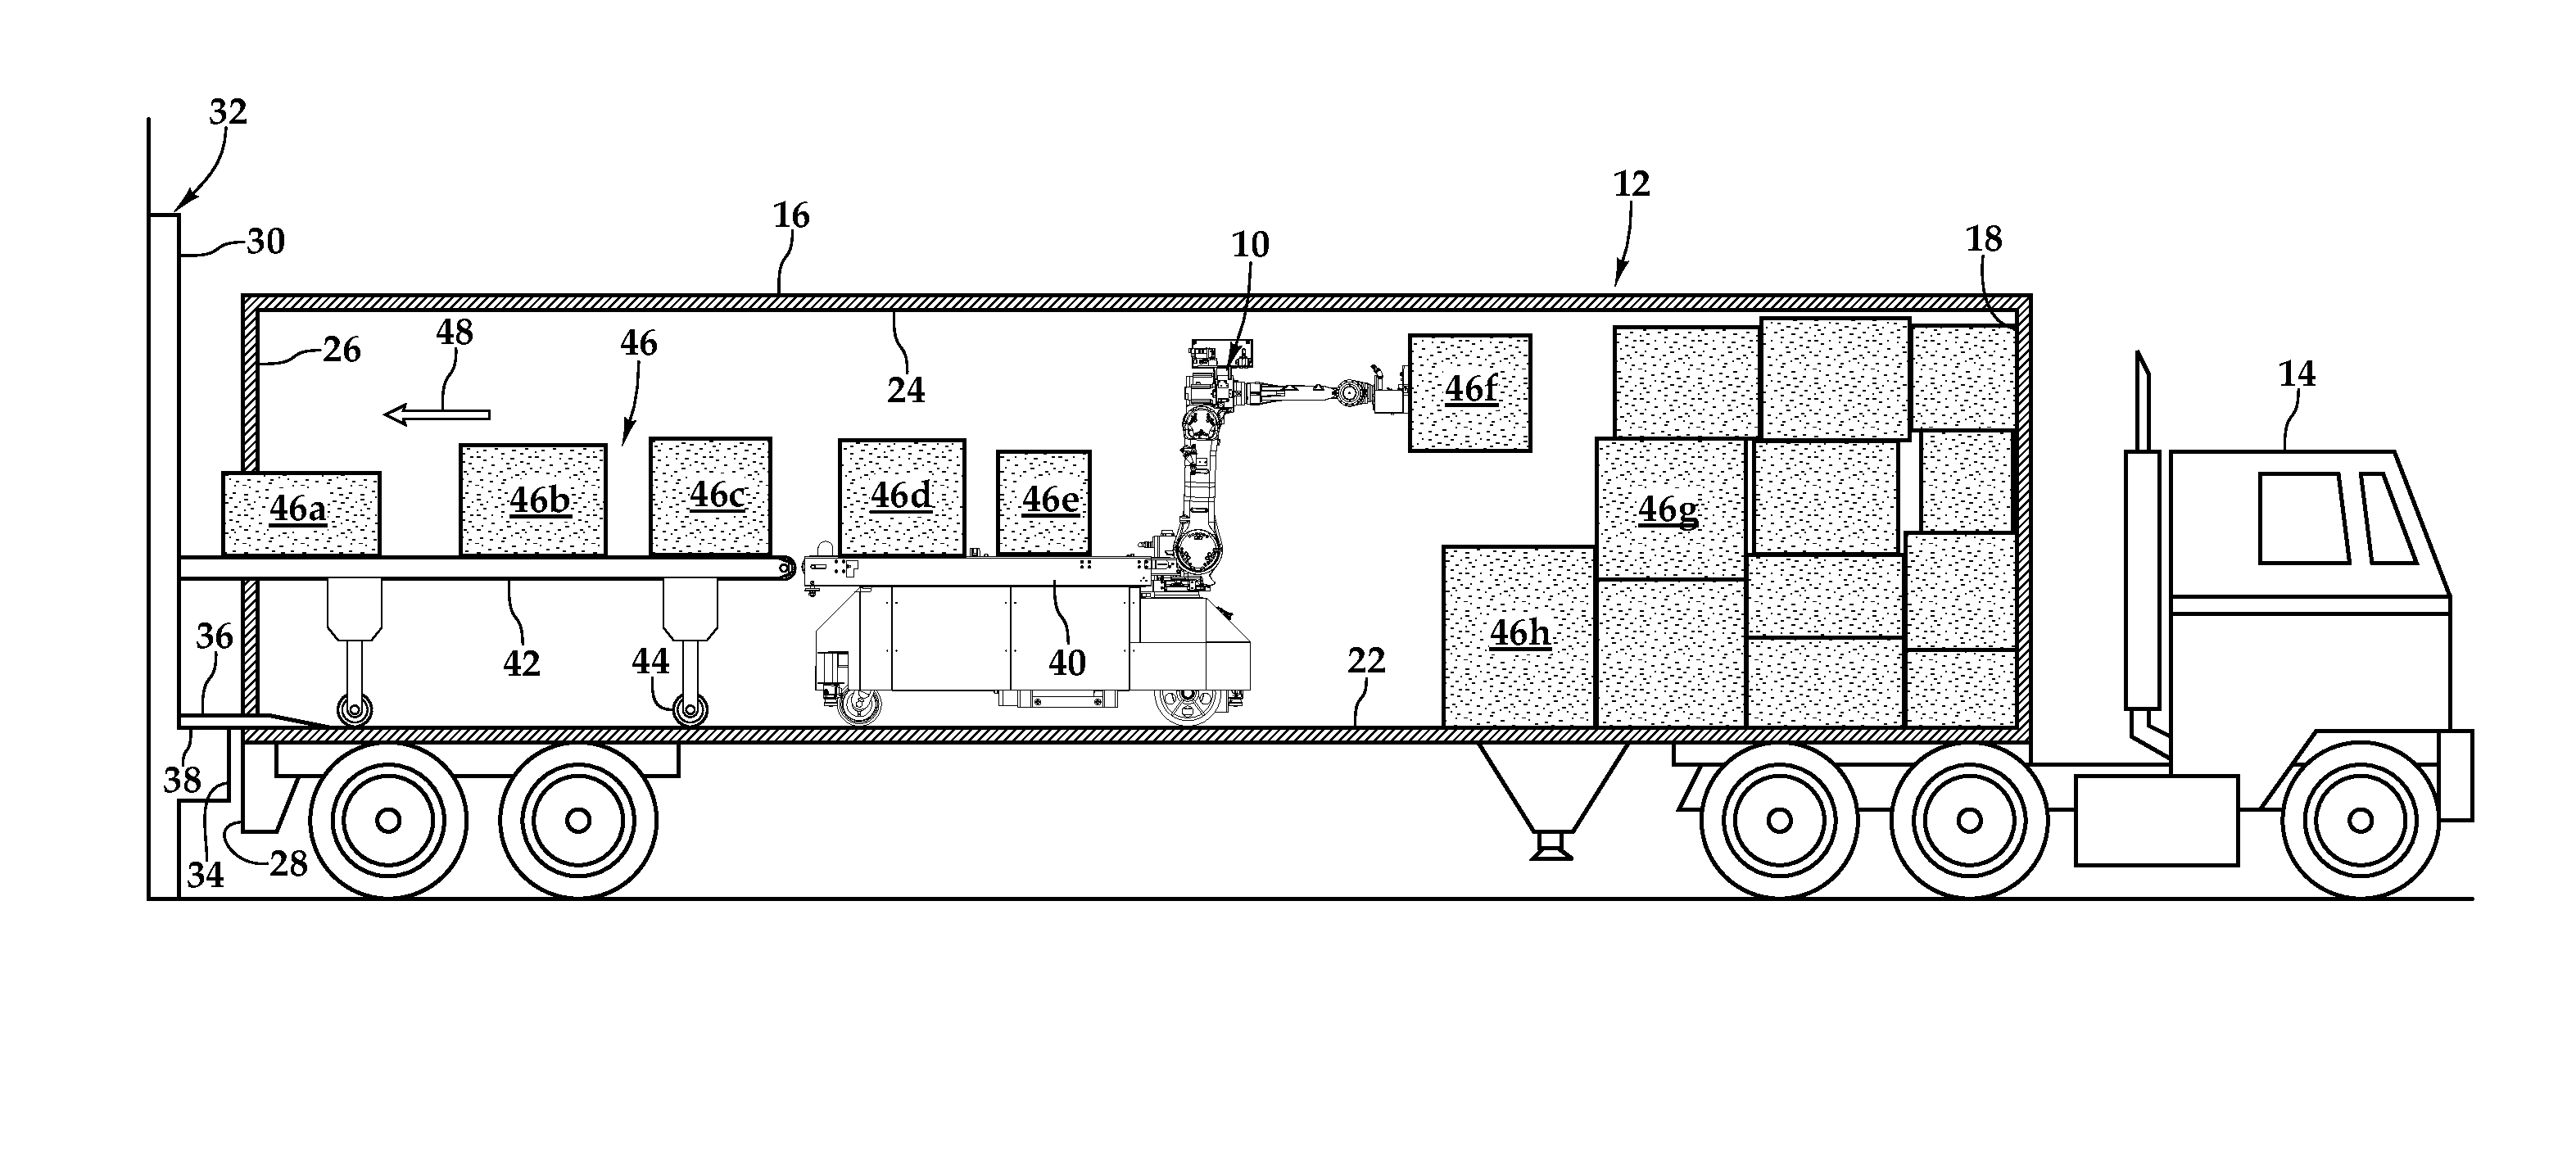 Automated truck unloader for unloading/unpacking product from trailers and containers